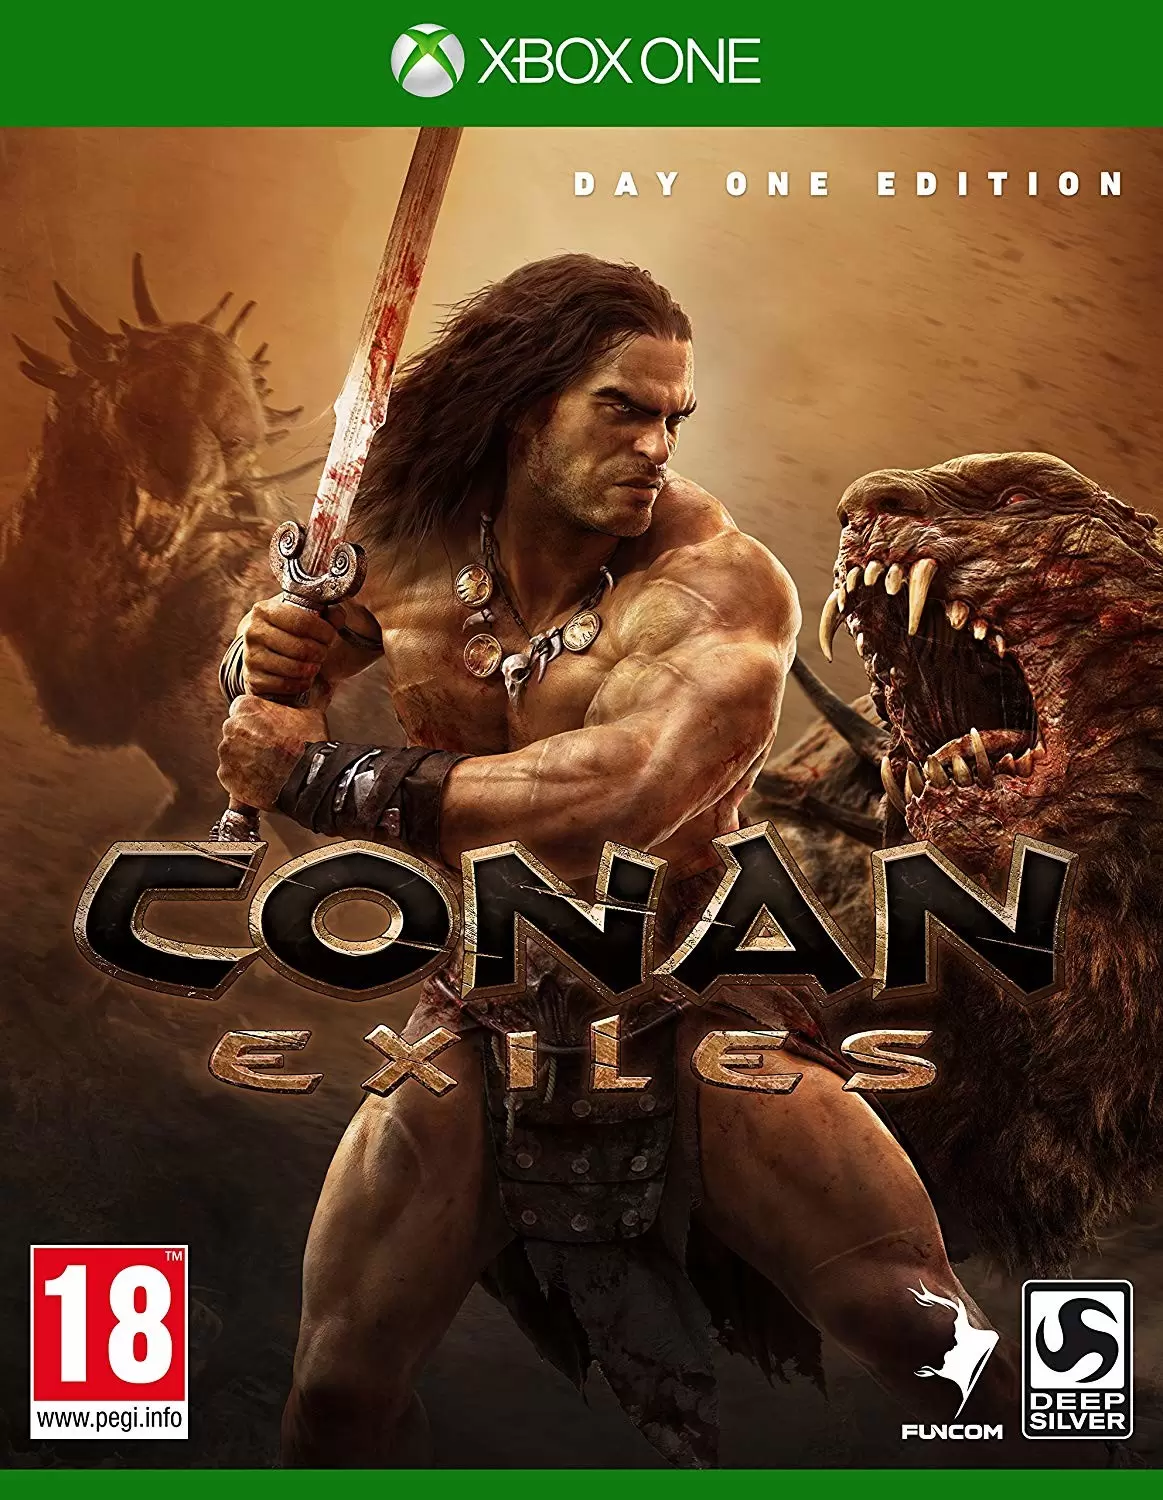 XBOX One Games - Conan Exiles - Day One Edition